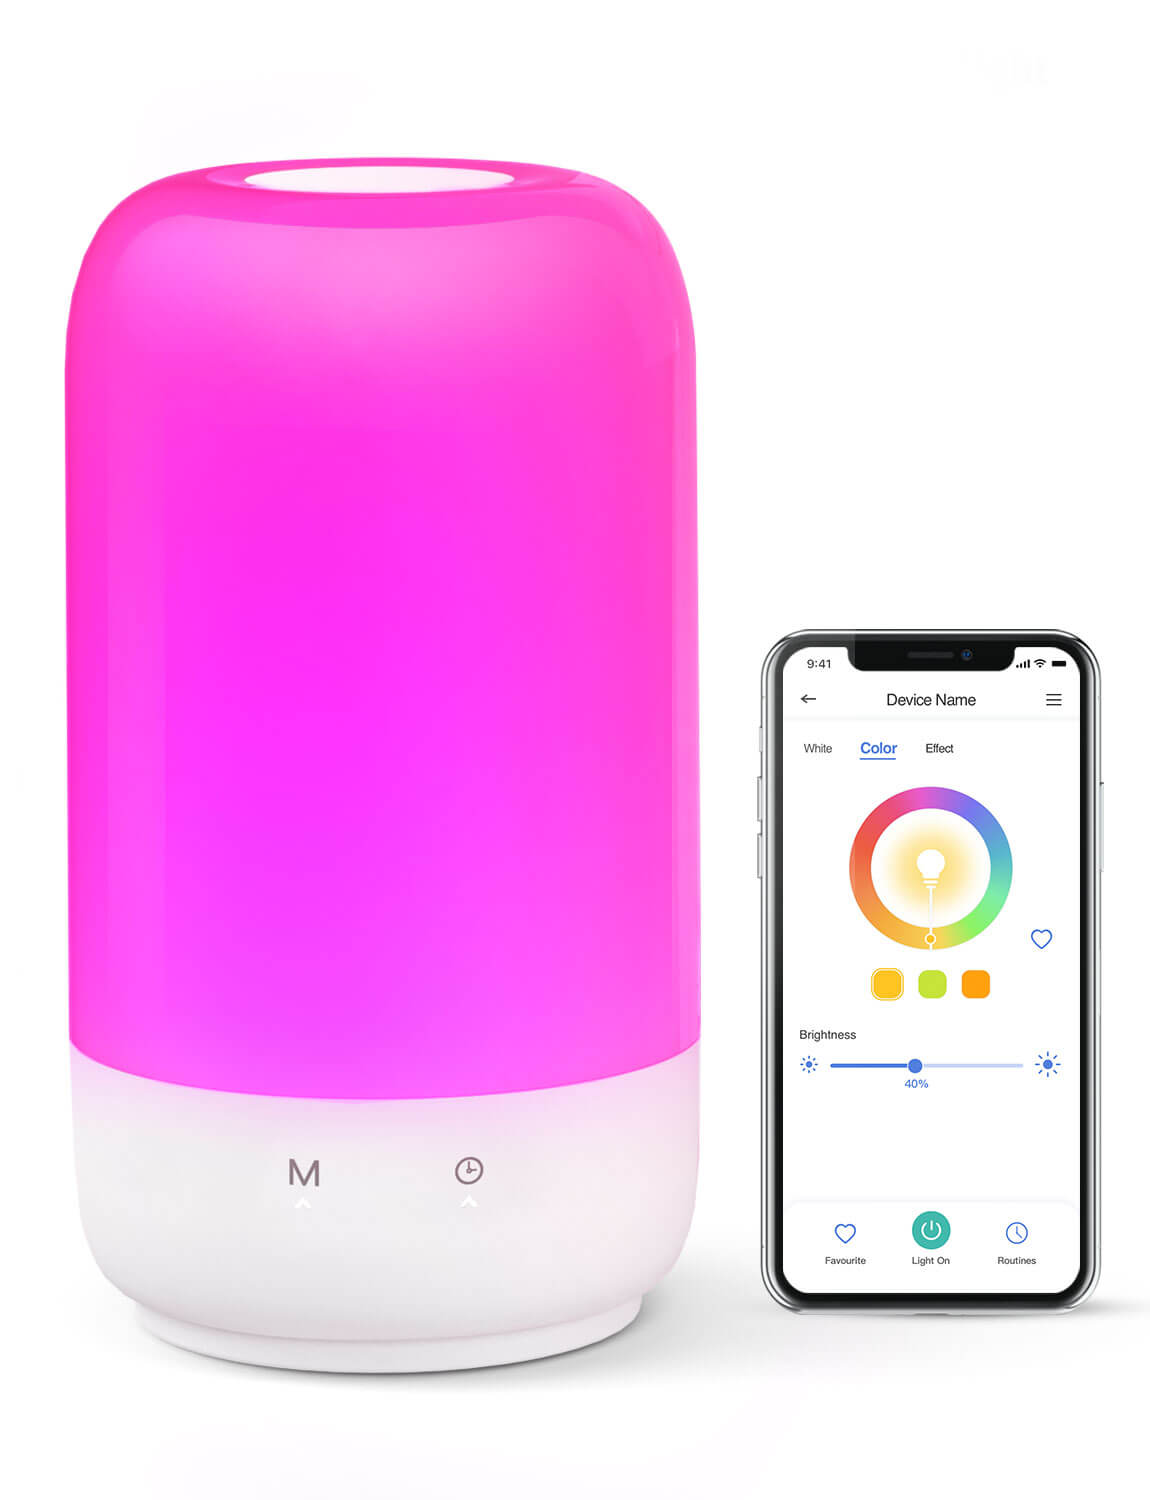 Xiaomi Mi Smart Bedside Lamp 2, Colorful Light, Table Lamp, Bluetooth WiFi  Touch APP Control Apple Home Kit 